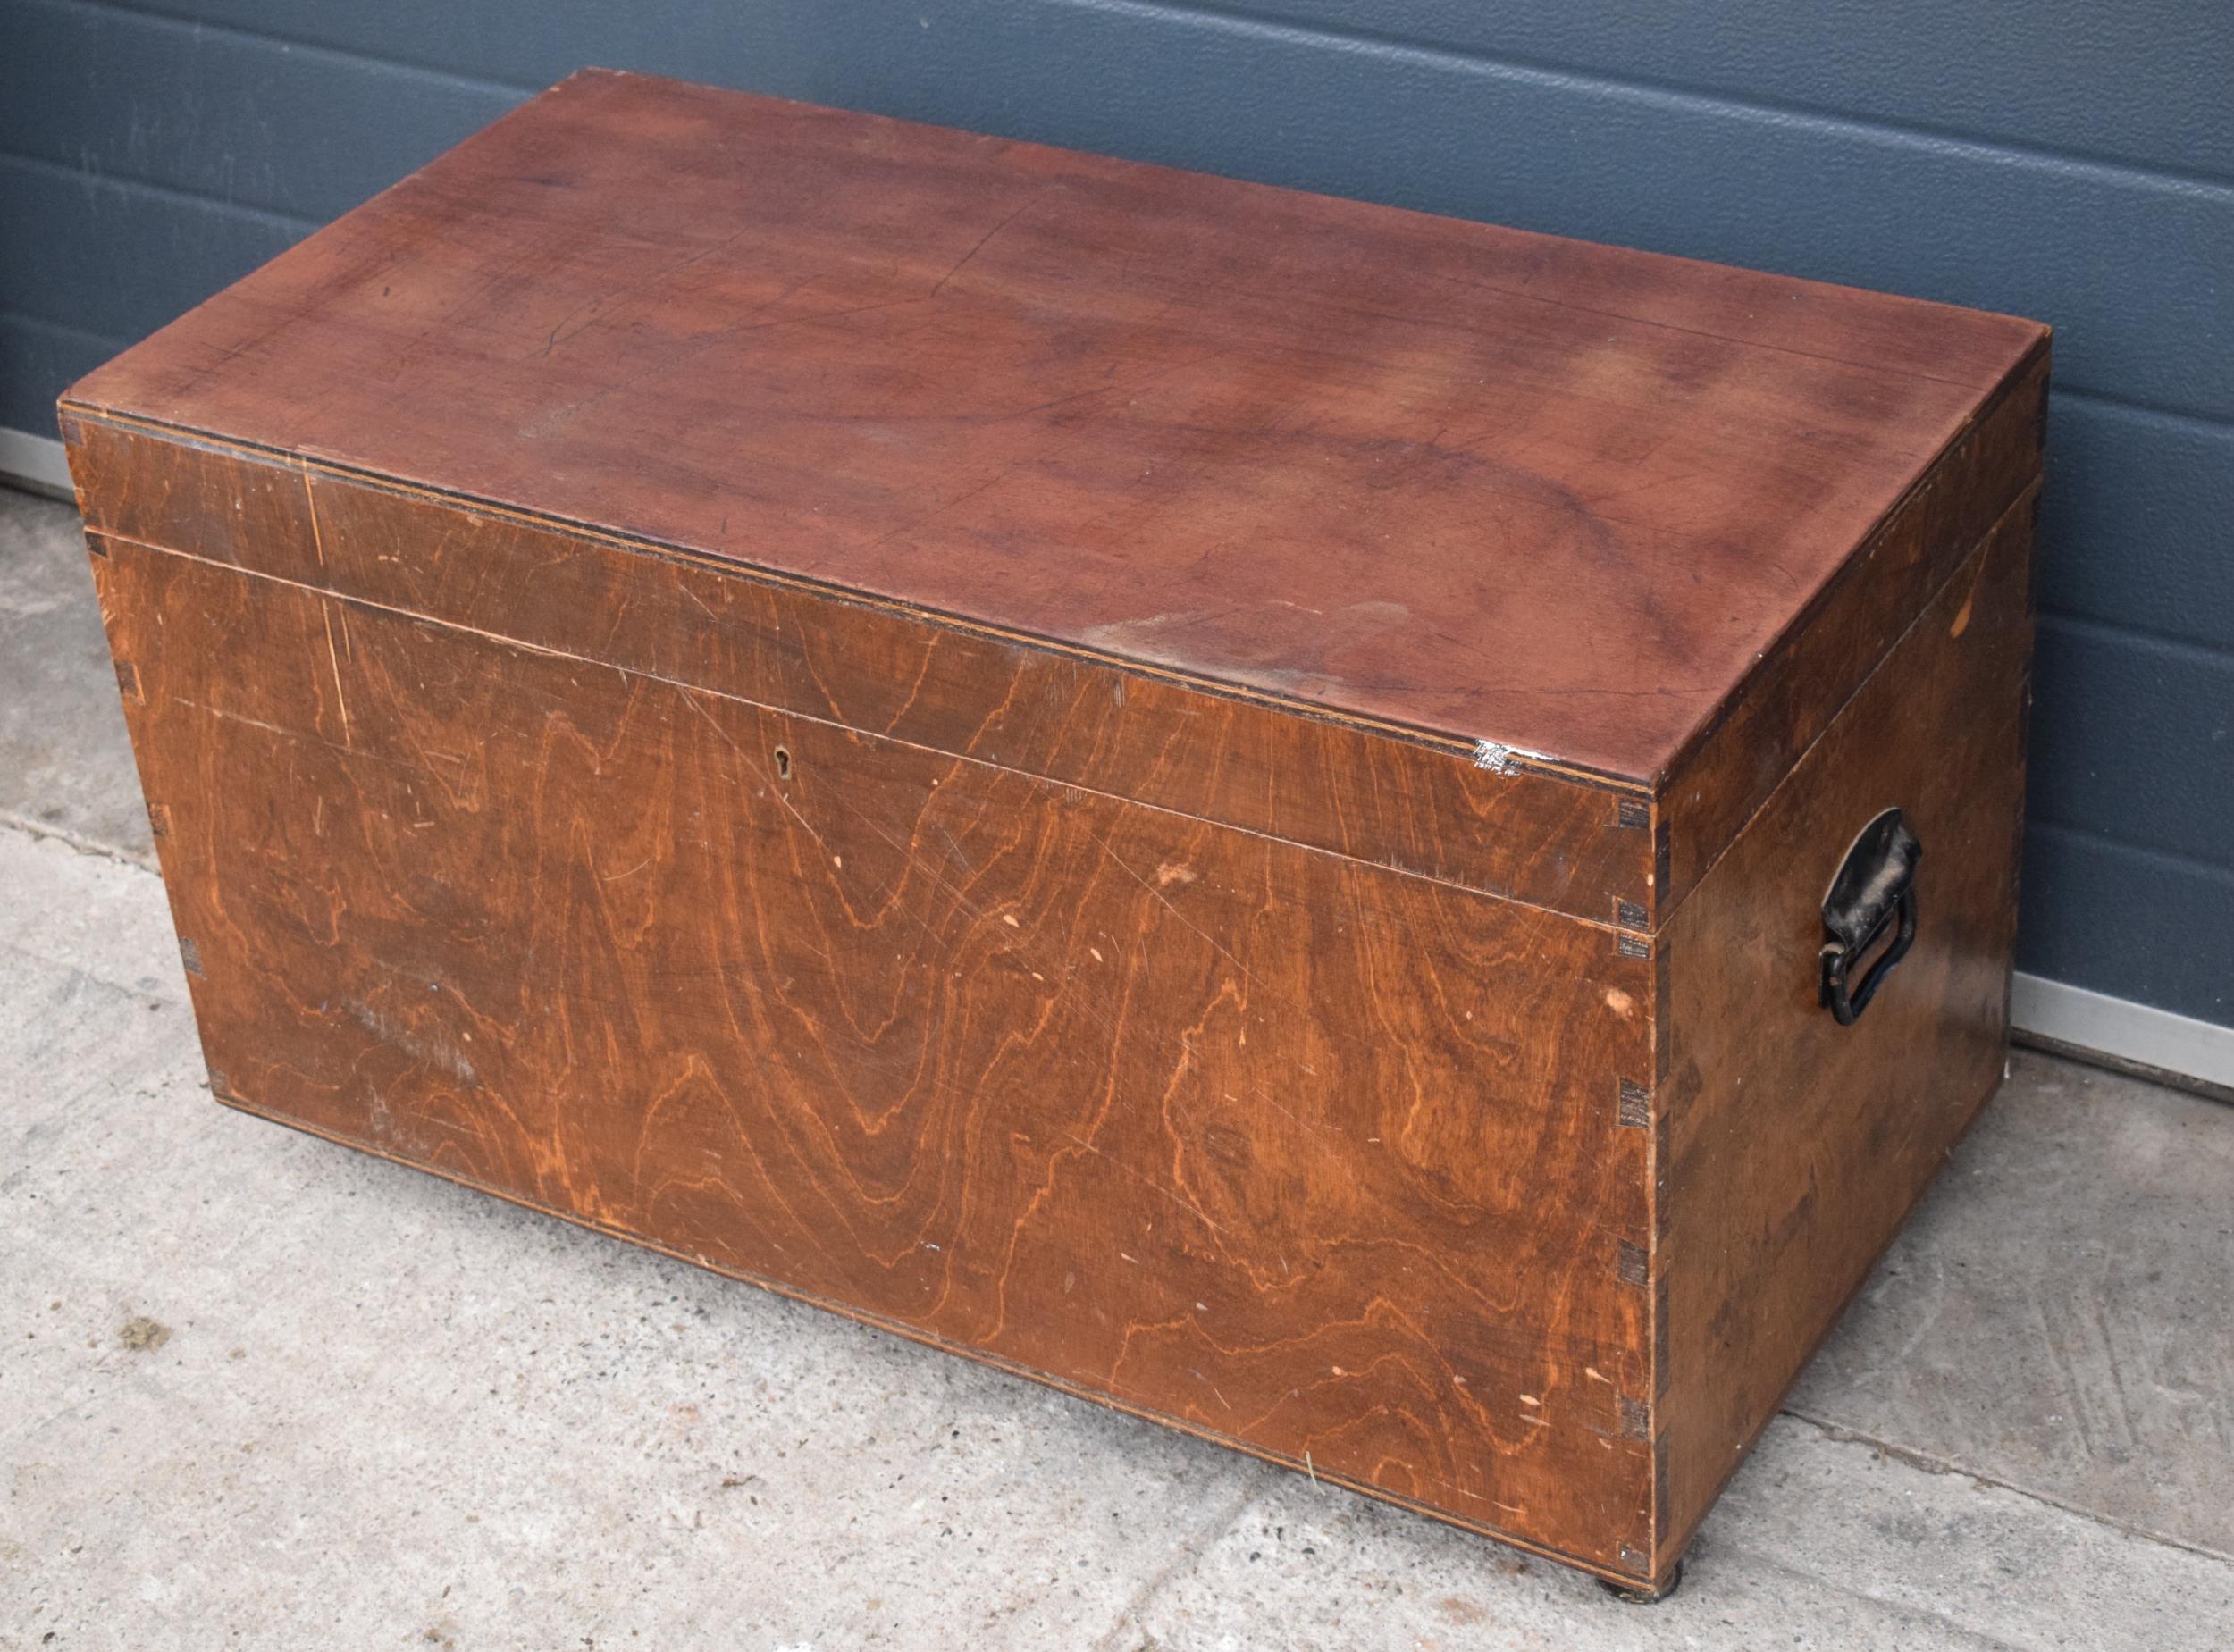 Vintage wooden tool box on caster wheels with pull out drawers, 84 x 43 x 48cm tall.